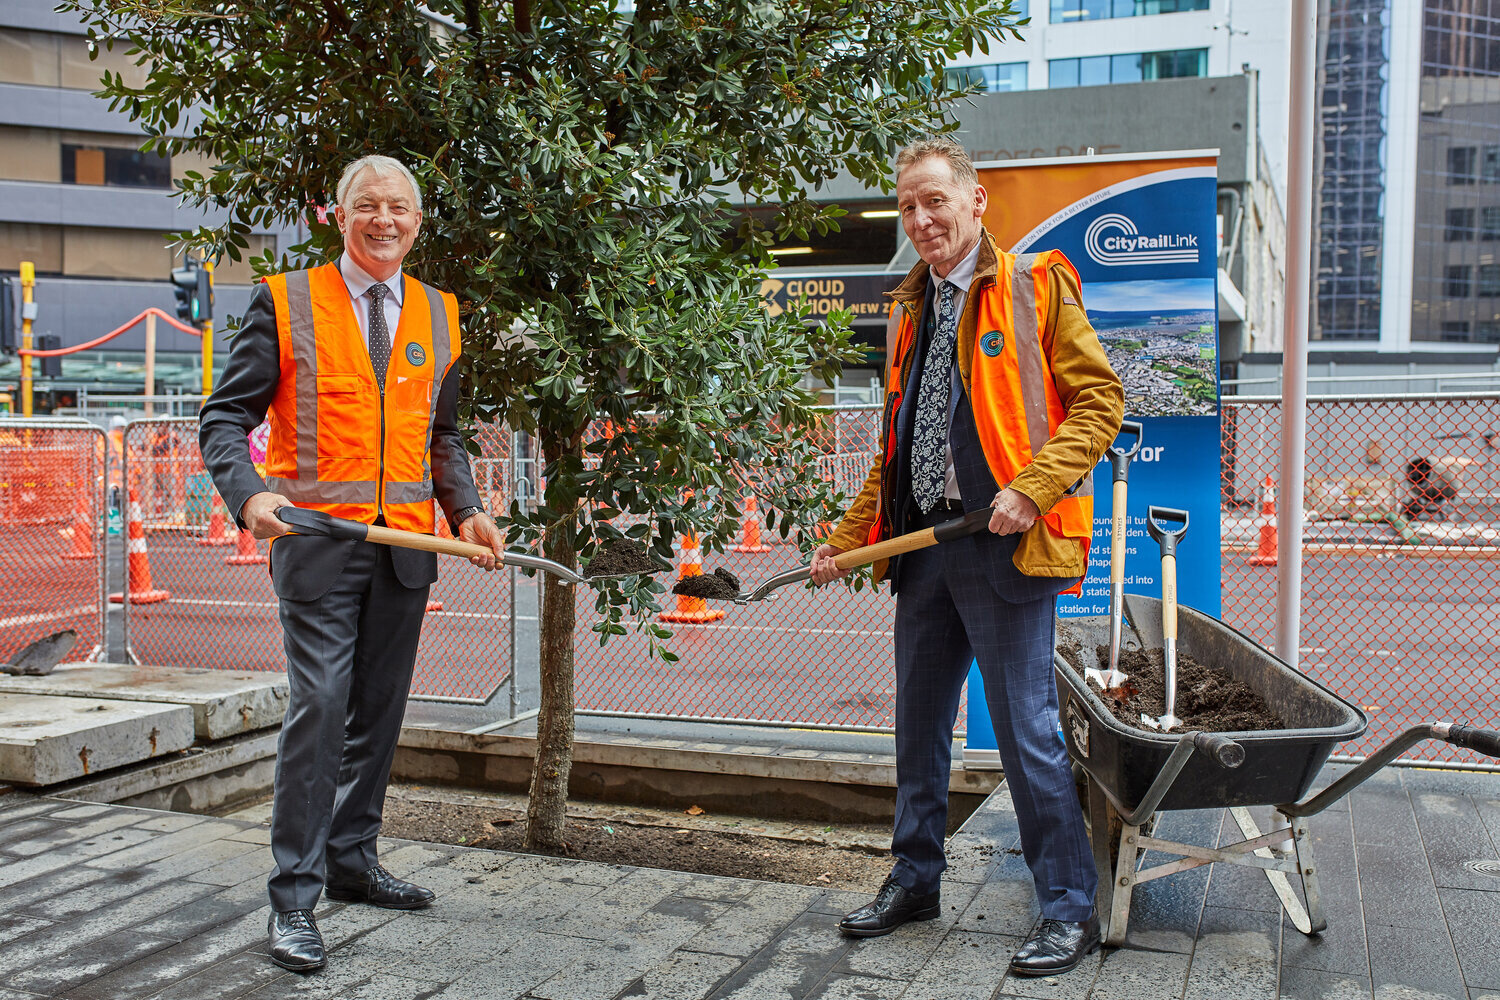 Auckland Mayor Phil Goff, left, and City Rail Link Chief Executive Dr Sean Sweeney planted the first pohutukawa.